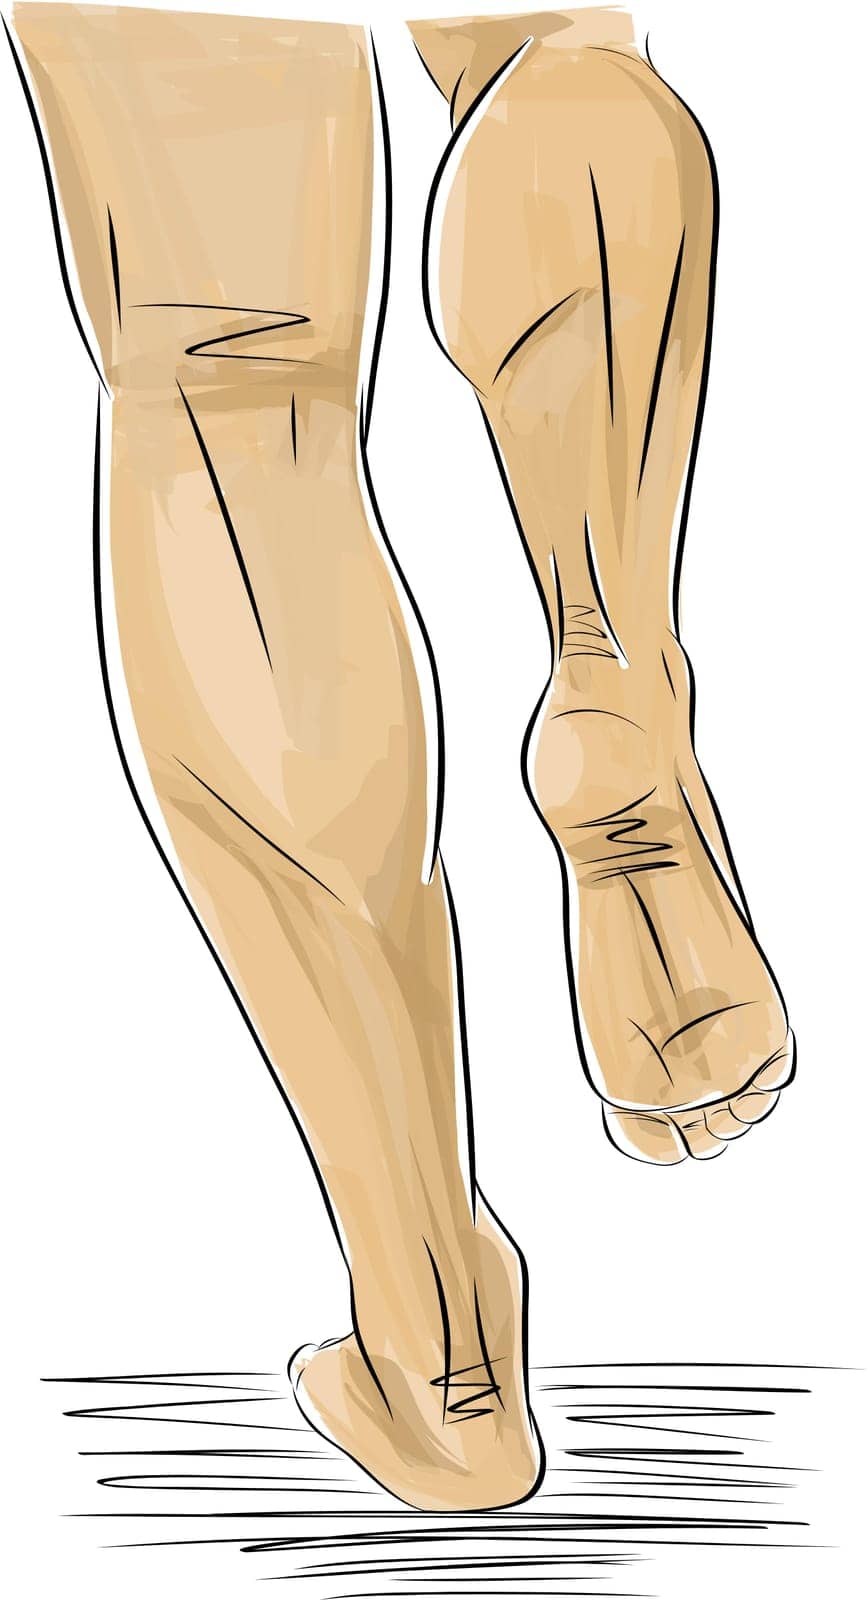 lower part of body running, barefoot marathon triathlete runner running otherwise known as natural running without footwear, sketch illustration